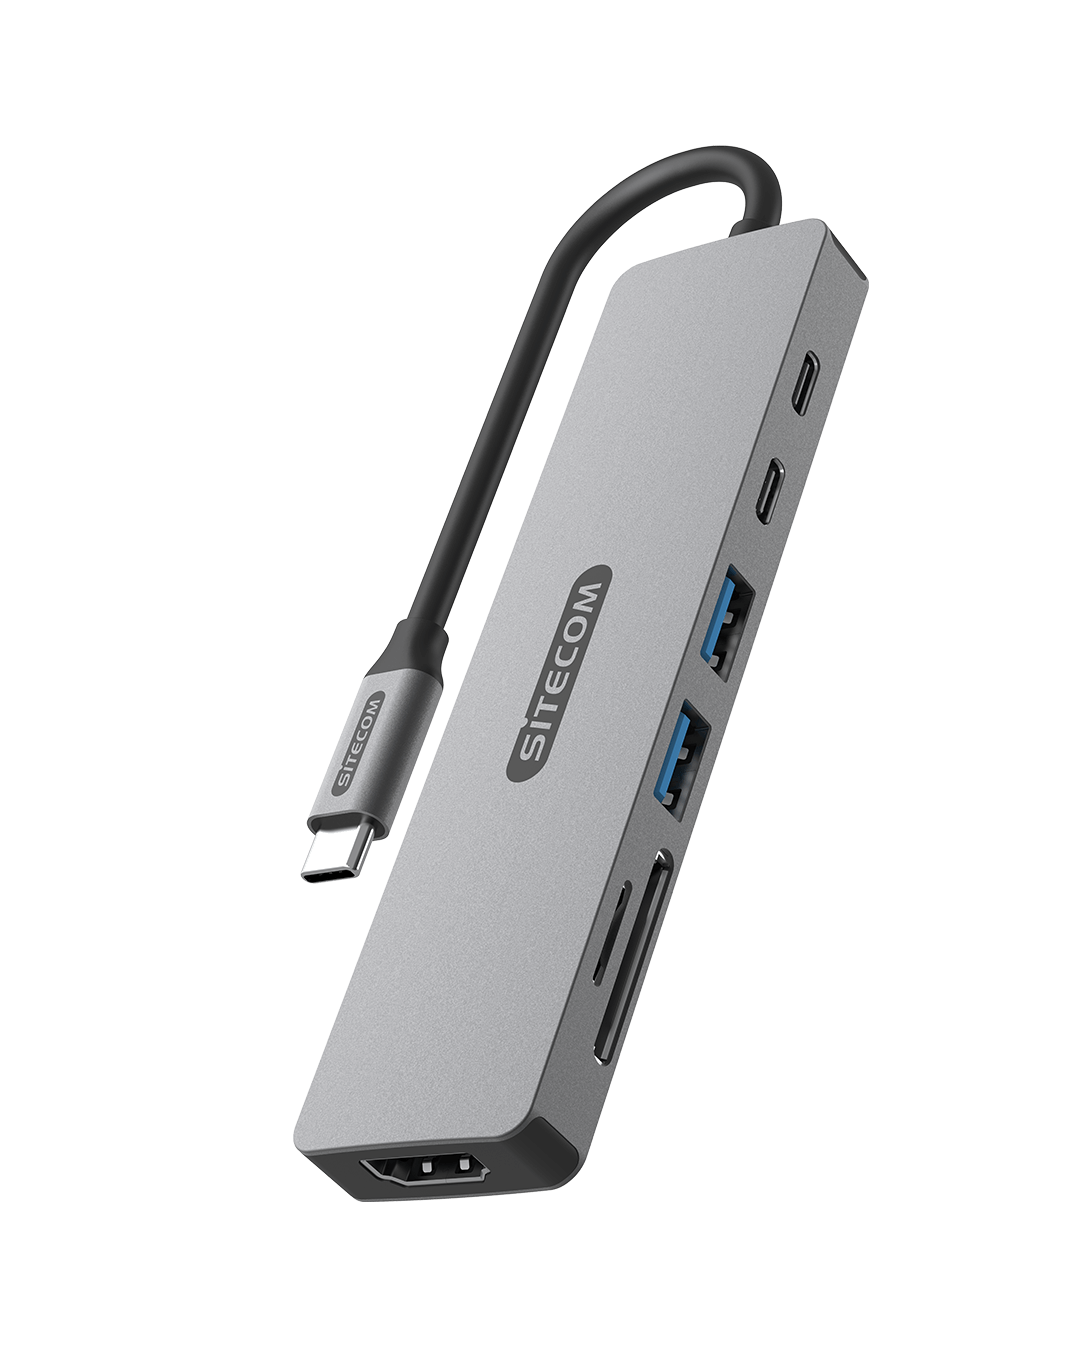 Sitecom - 7 in 1 USB-C Power Delivery Multiport Adapter - CN-5504